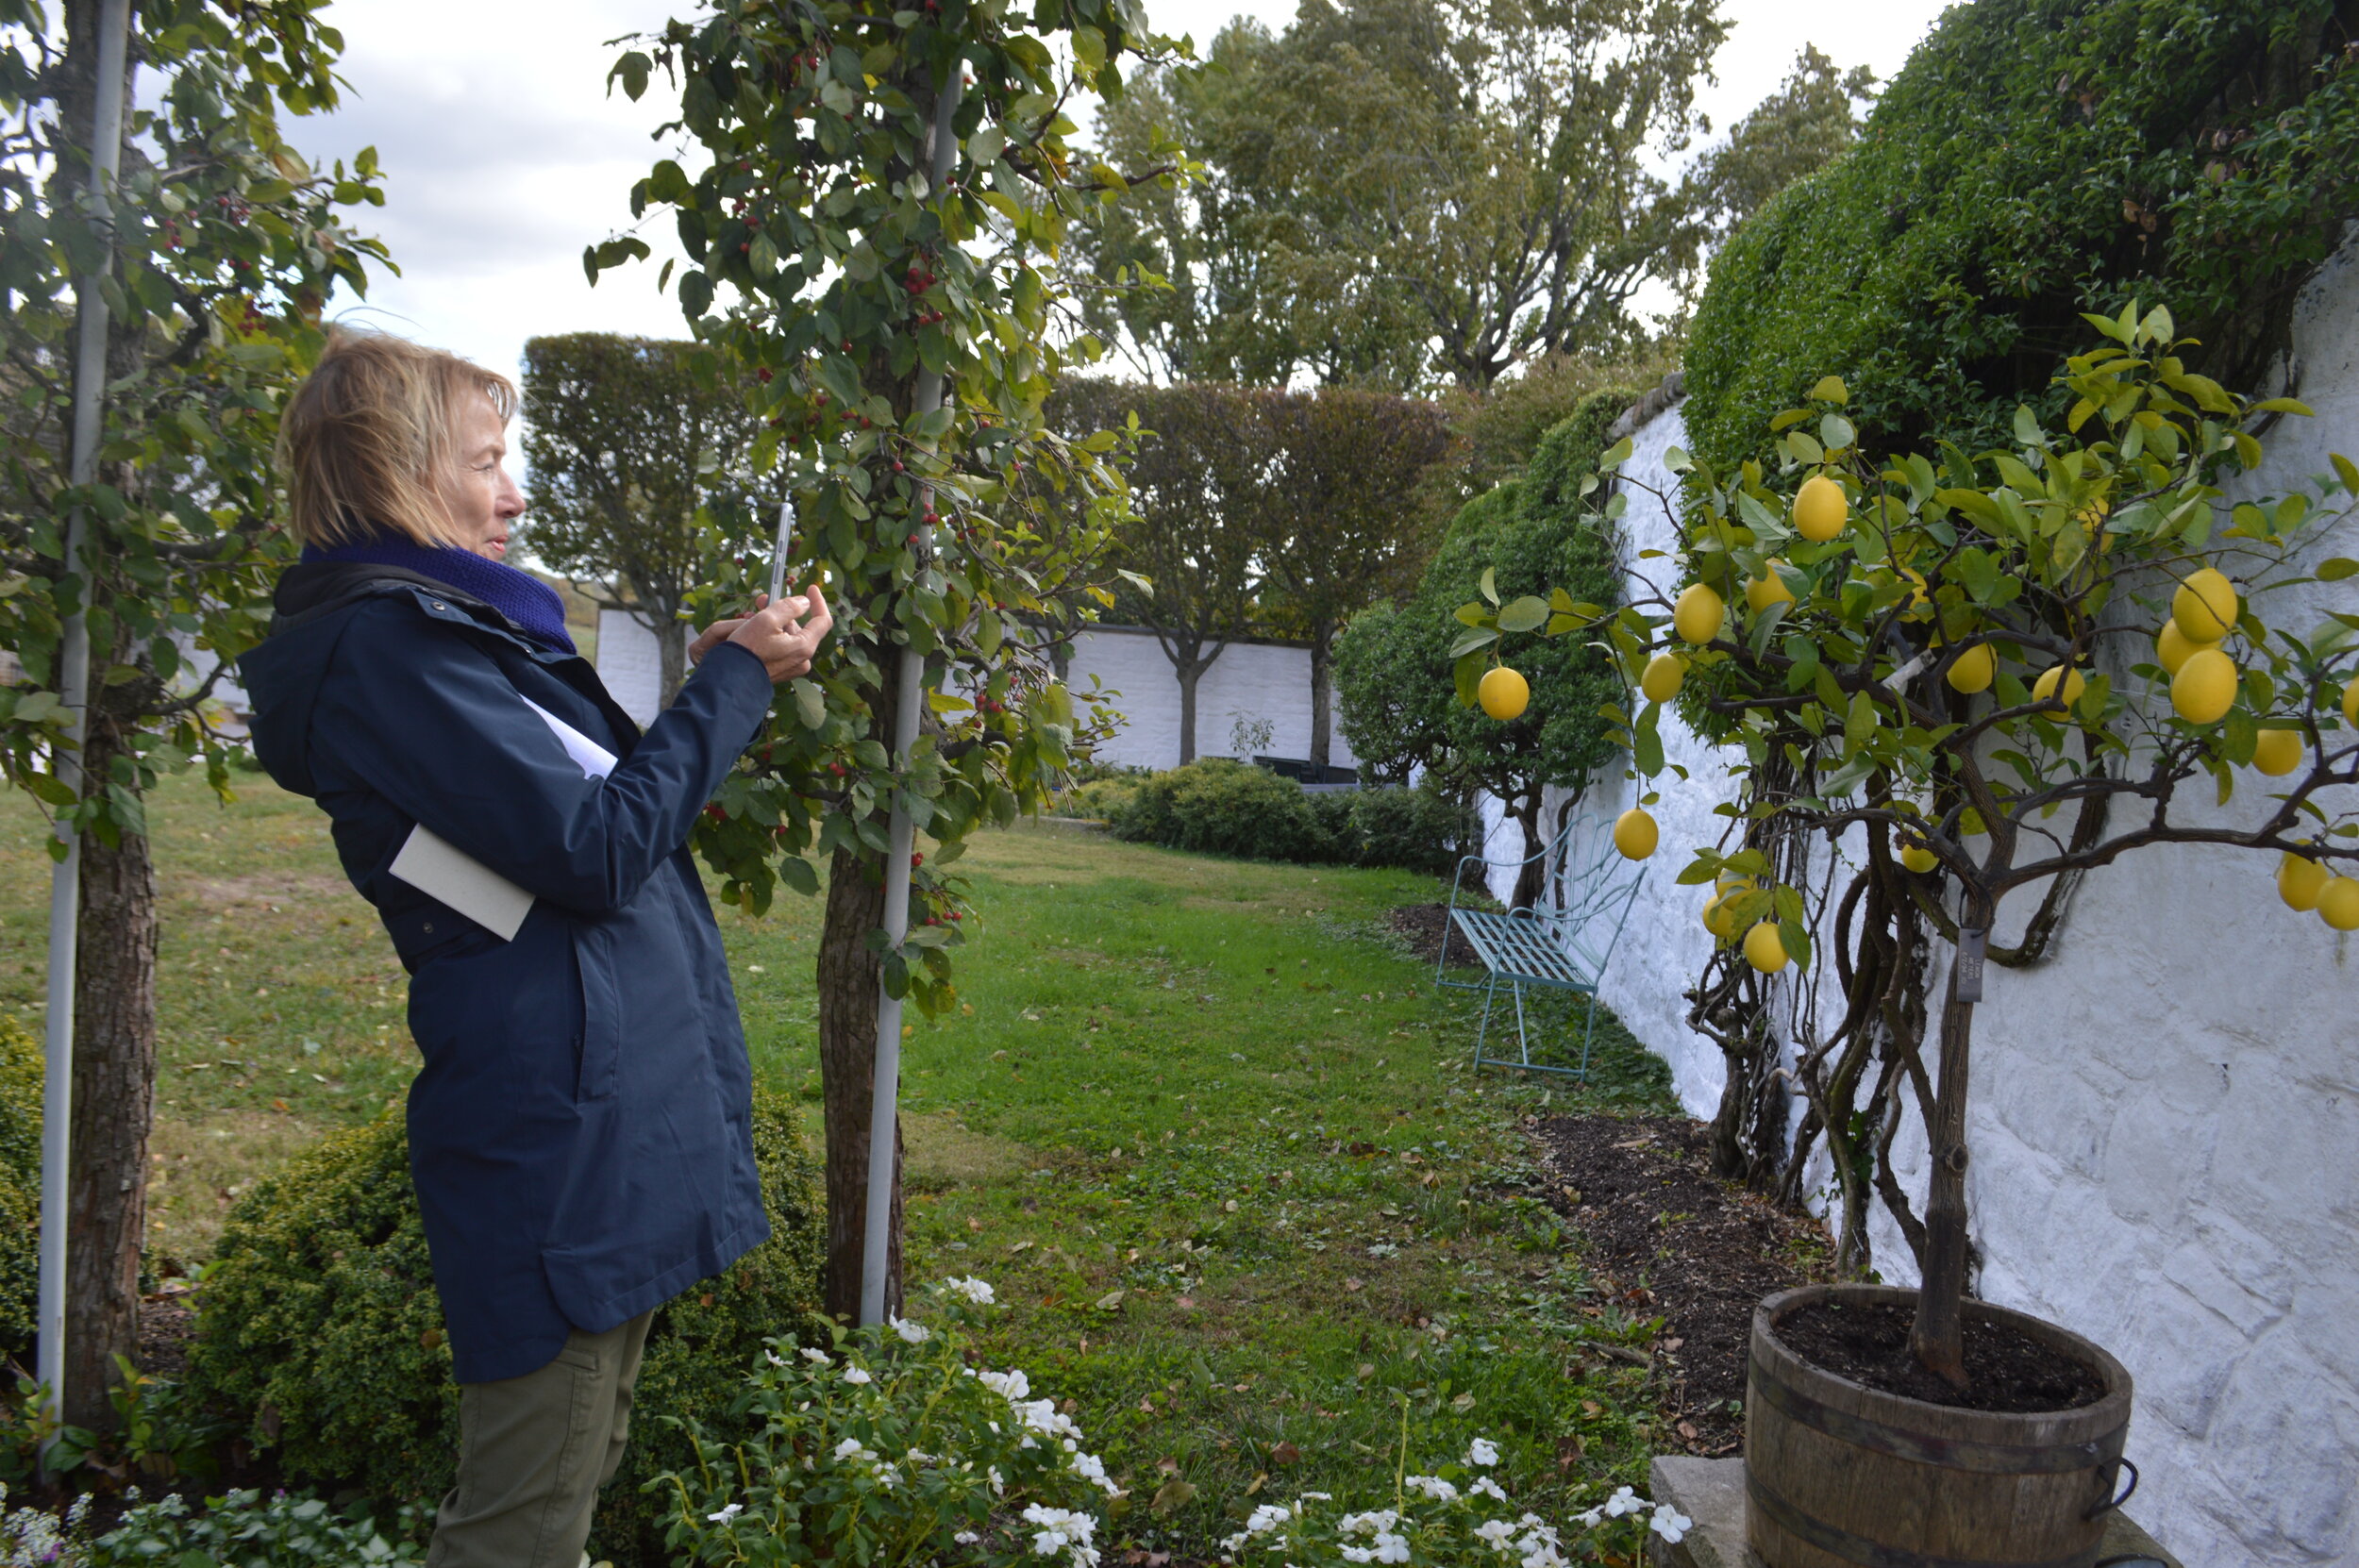  Judy snaps a picture of a lemon tree, one of the tropical plants that will be moved into the glass house before winter. Judy said her favorite thing about working in Bunny Mellon’s garden is “the joy that I feel about the spaces she created - they’r